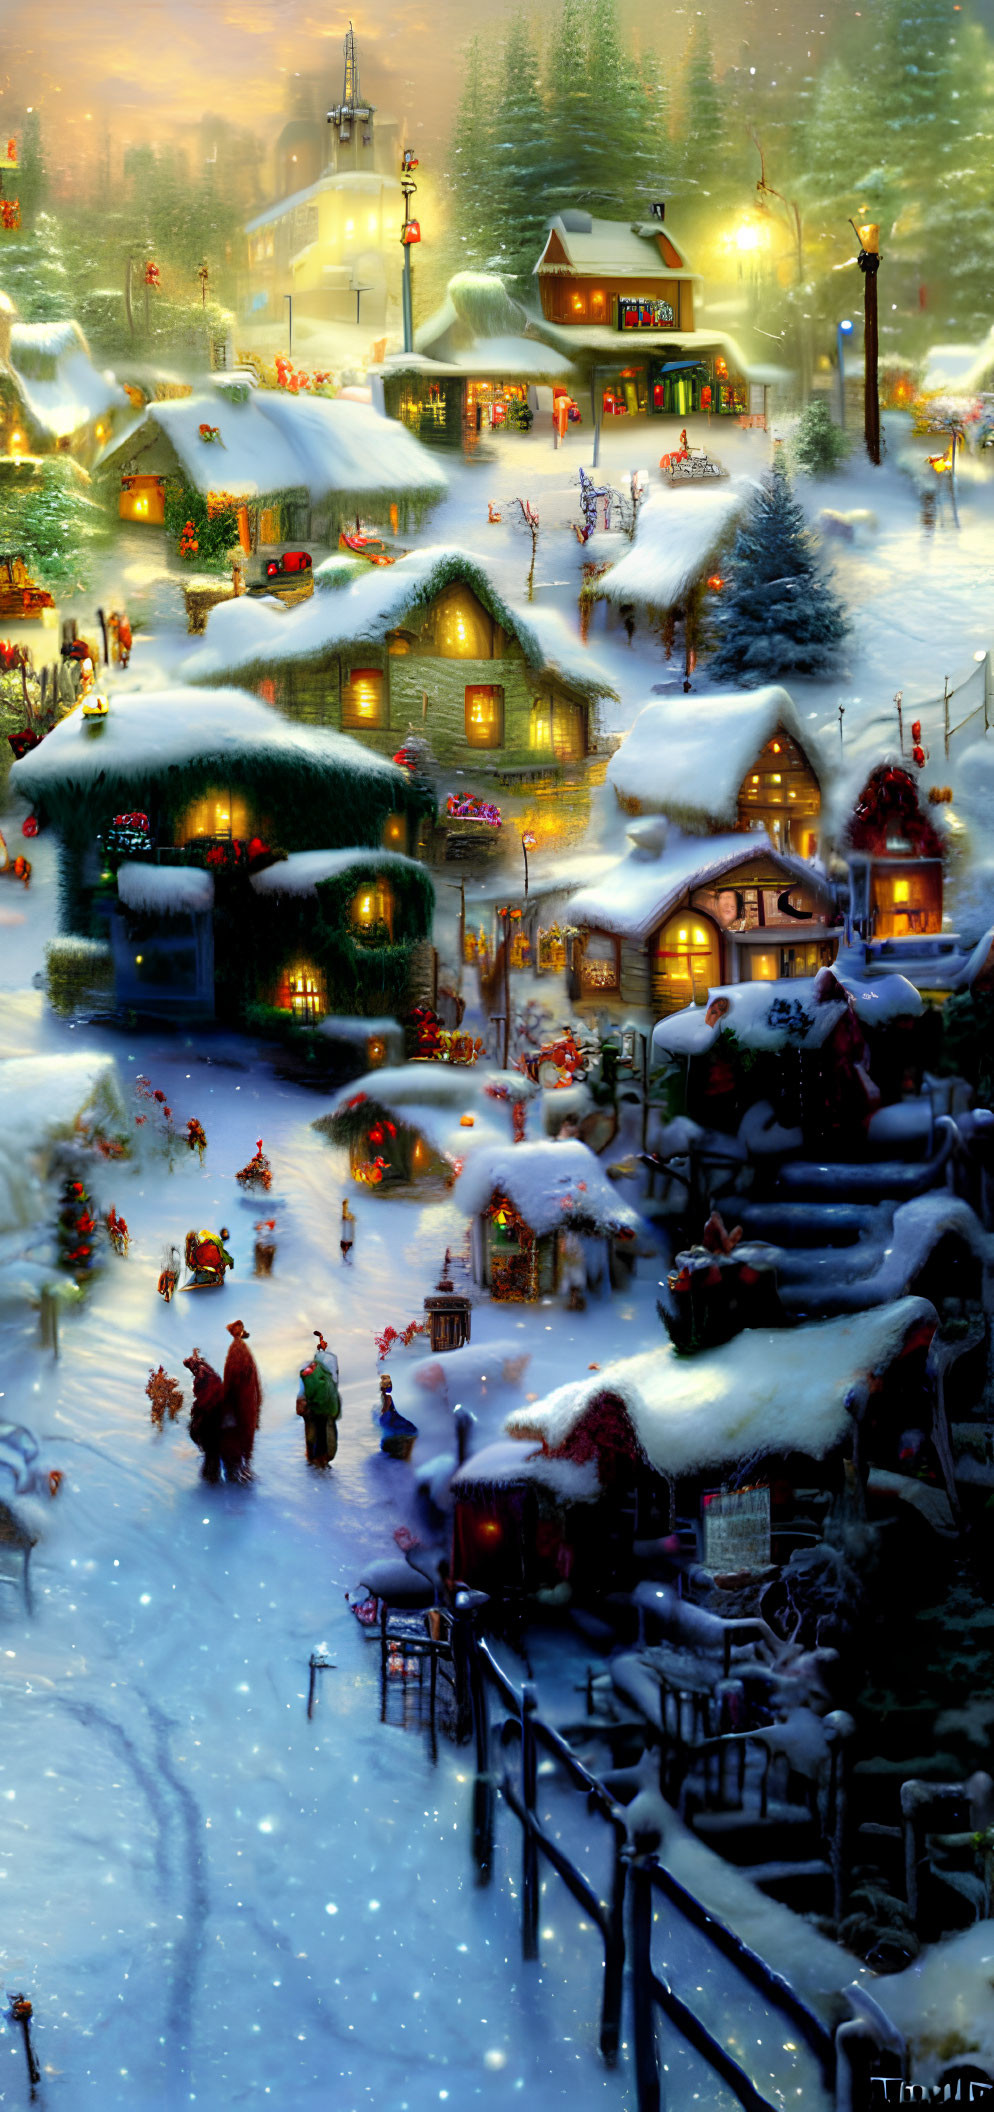 Snow-covered winter village with illuminated houses and villagers on snowy path